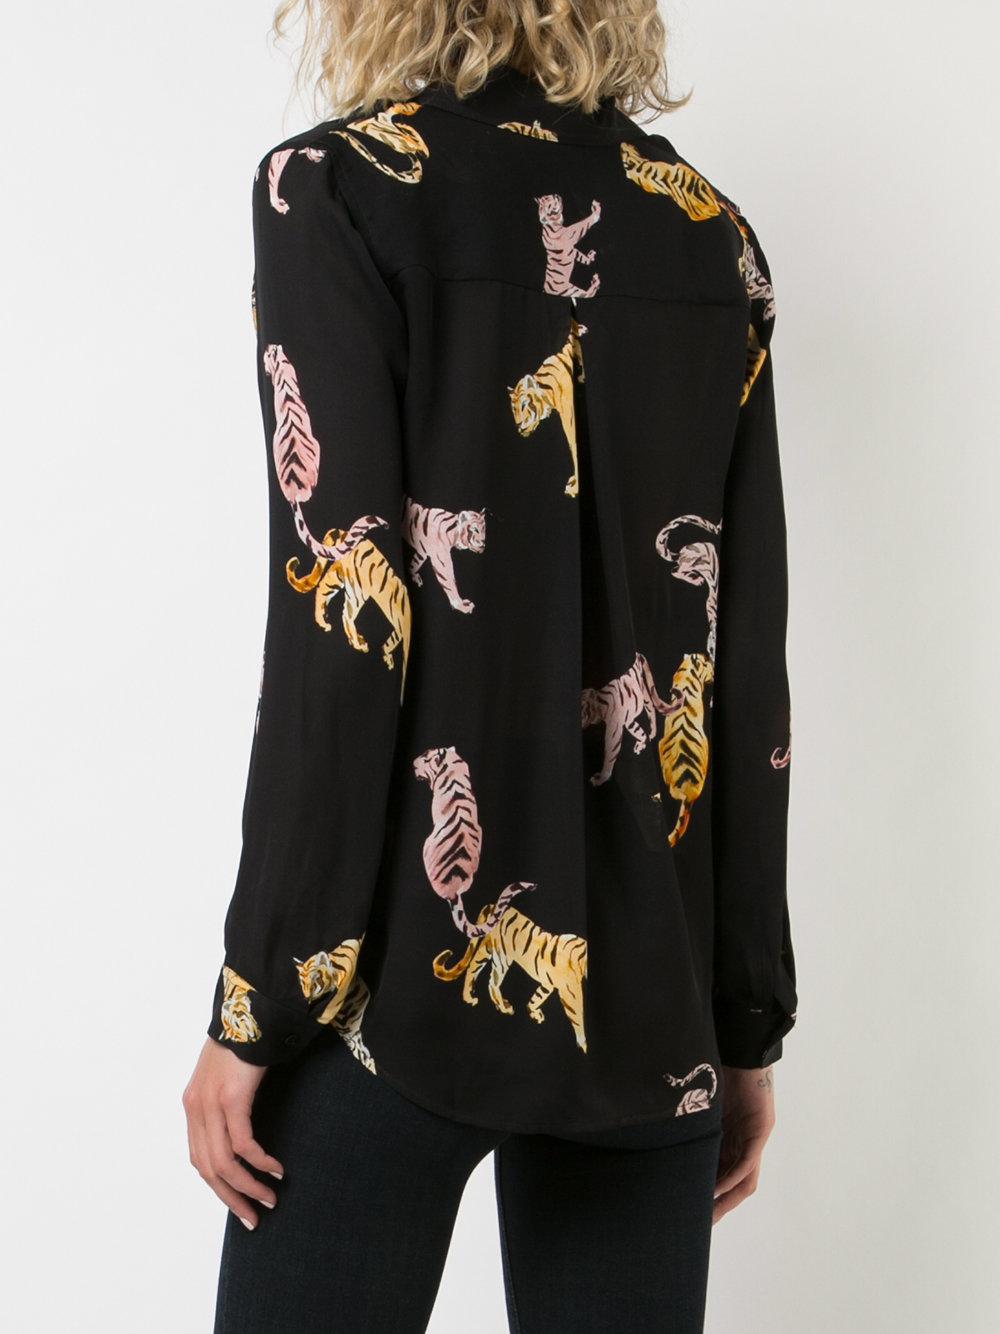 L'Agence Tiger Print Blouse in Black | Lyst